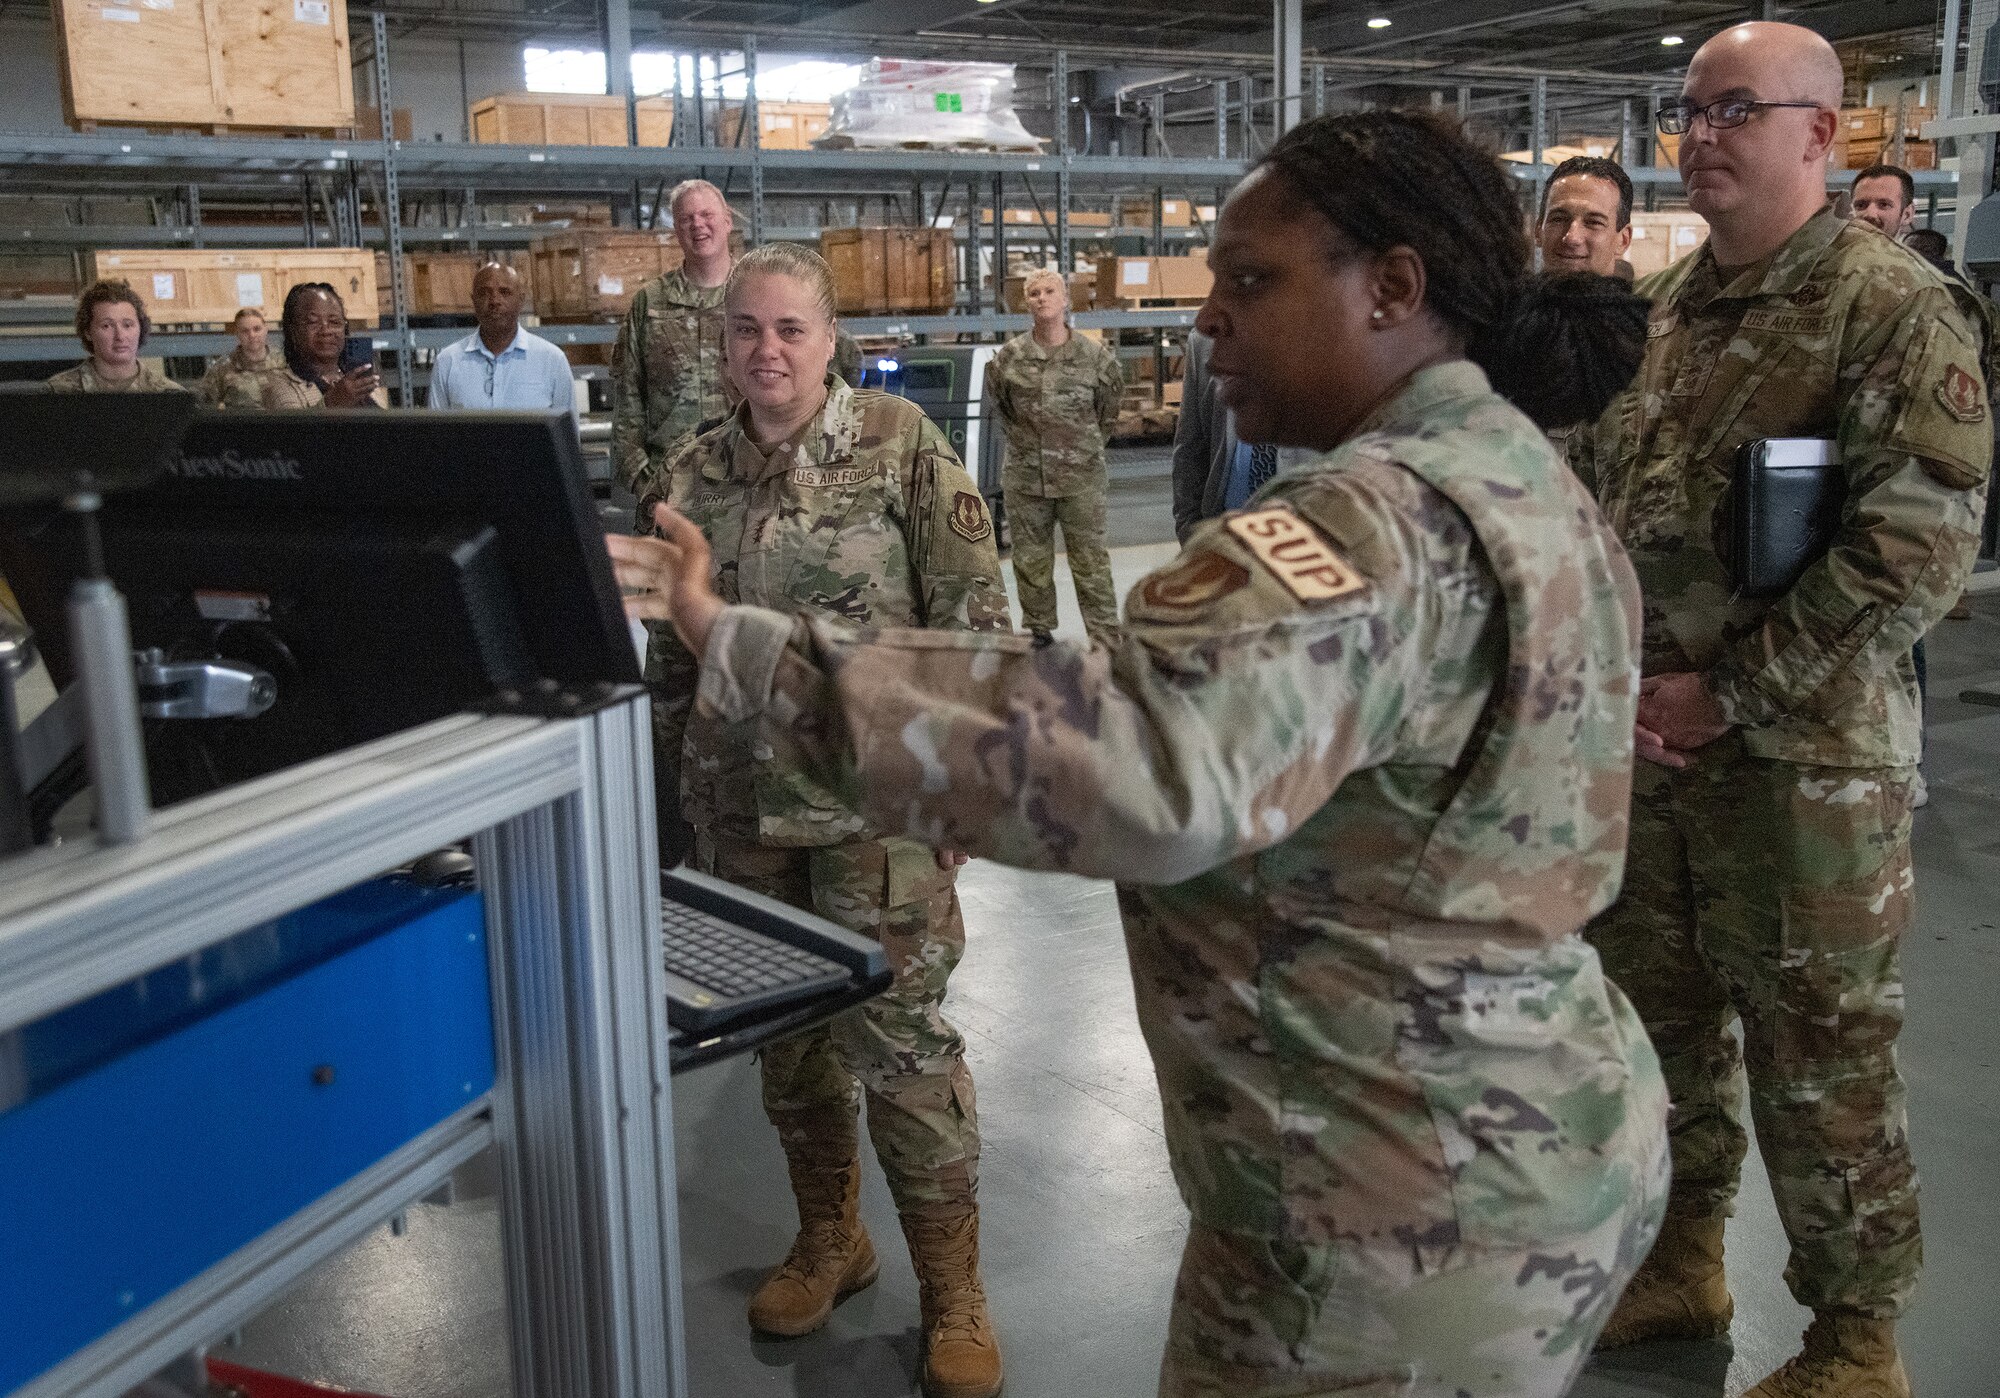 U.S. Air Force Lt. Gen. Linda S. Hurry, Deputy Commander, Air Force Materiel Command, observes a demonstration of the 96th Logistics Readiness Squadron materiel management flight’s new inventory software at Eglin Air Force Base, Fla.